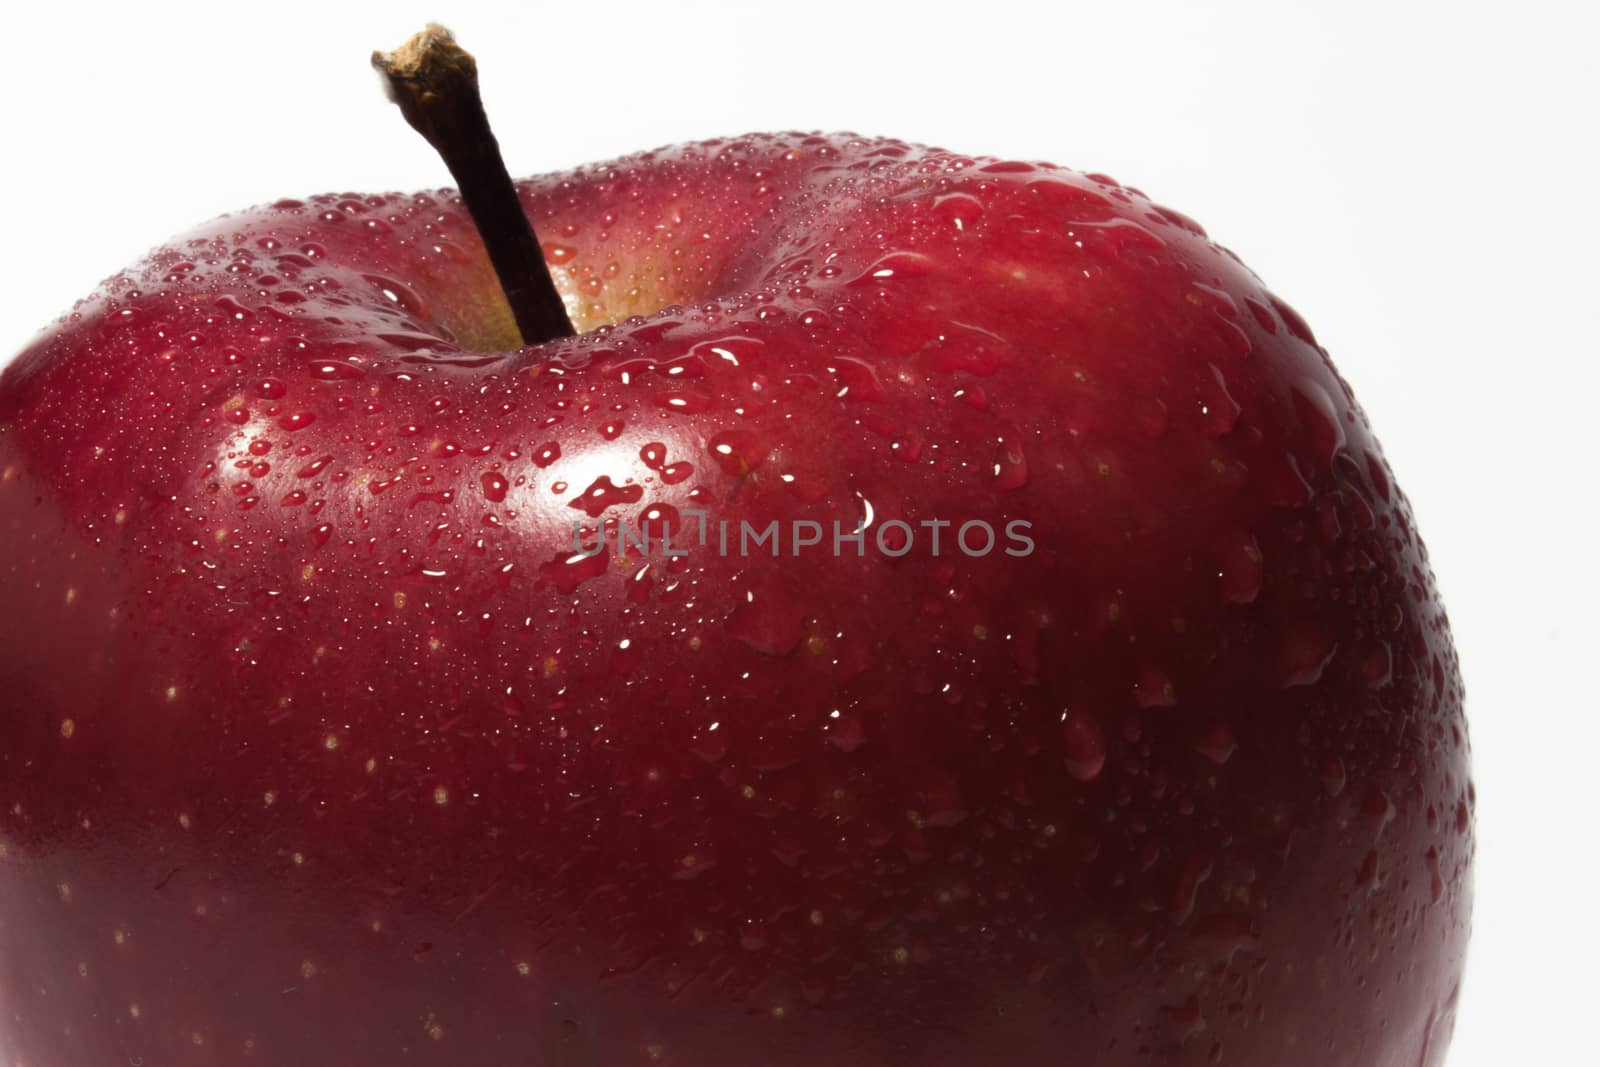 Red apple with water droplets close up view.